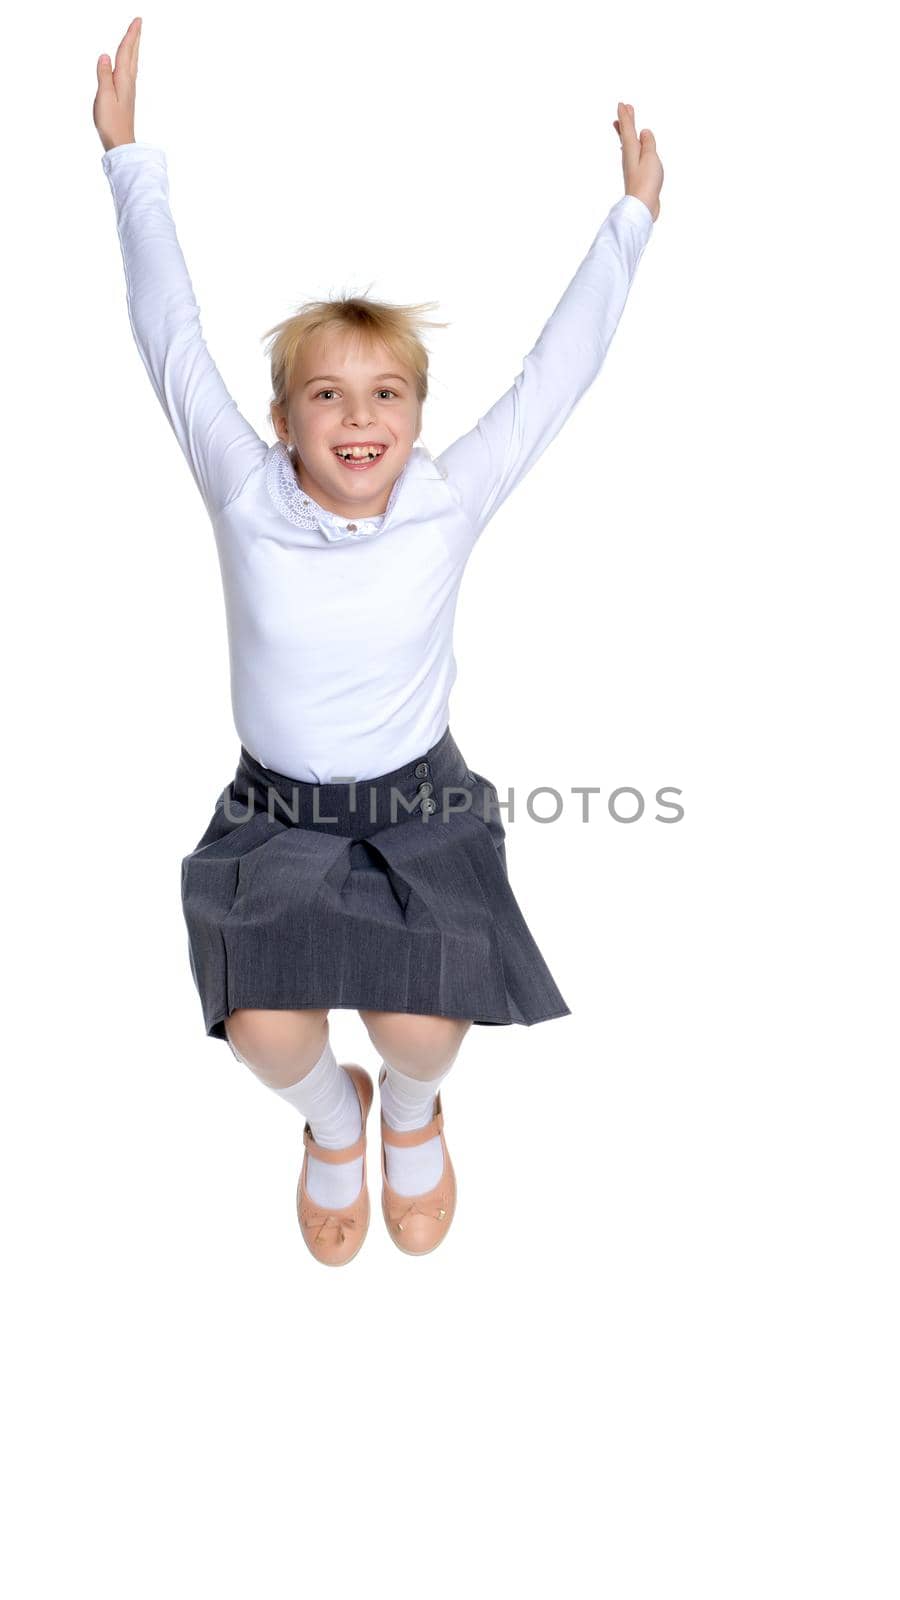 A little girl is jumping and waving her hands. The concept of a happy childhood, outdoor recreation. Isolated on white background.